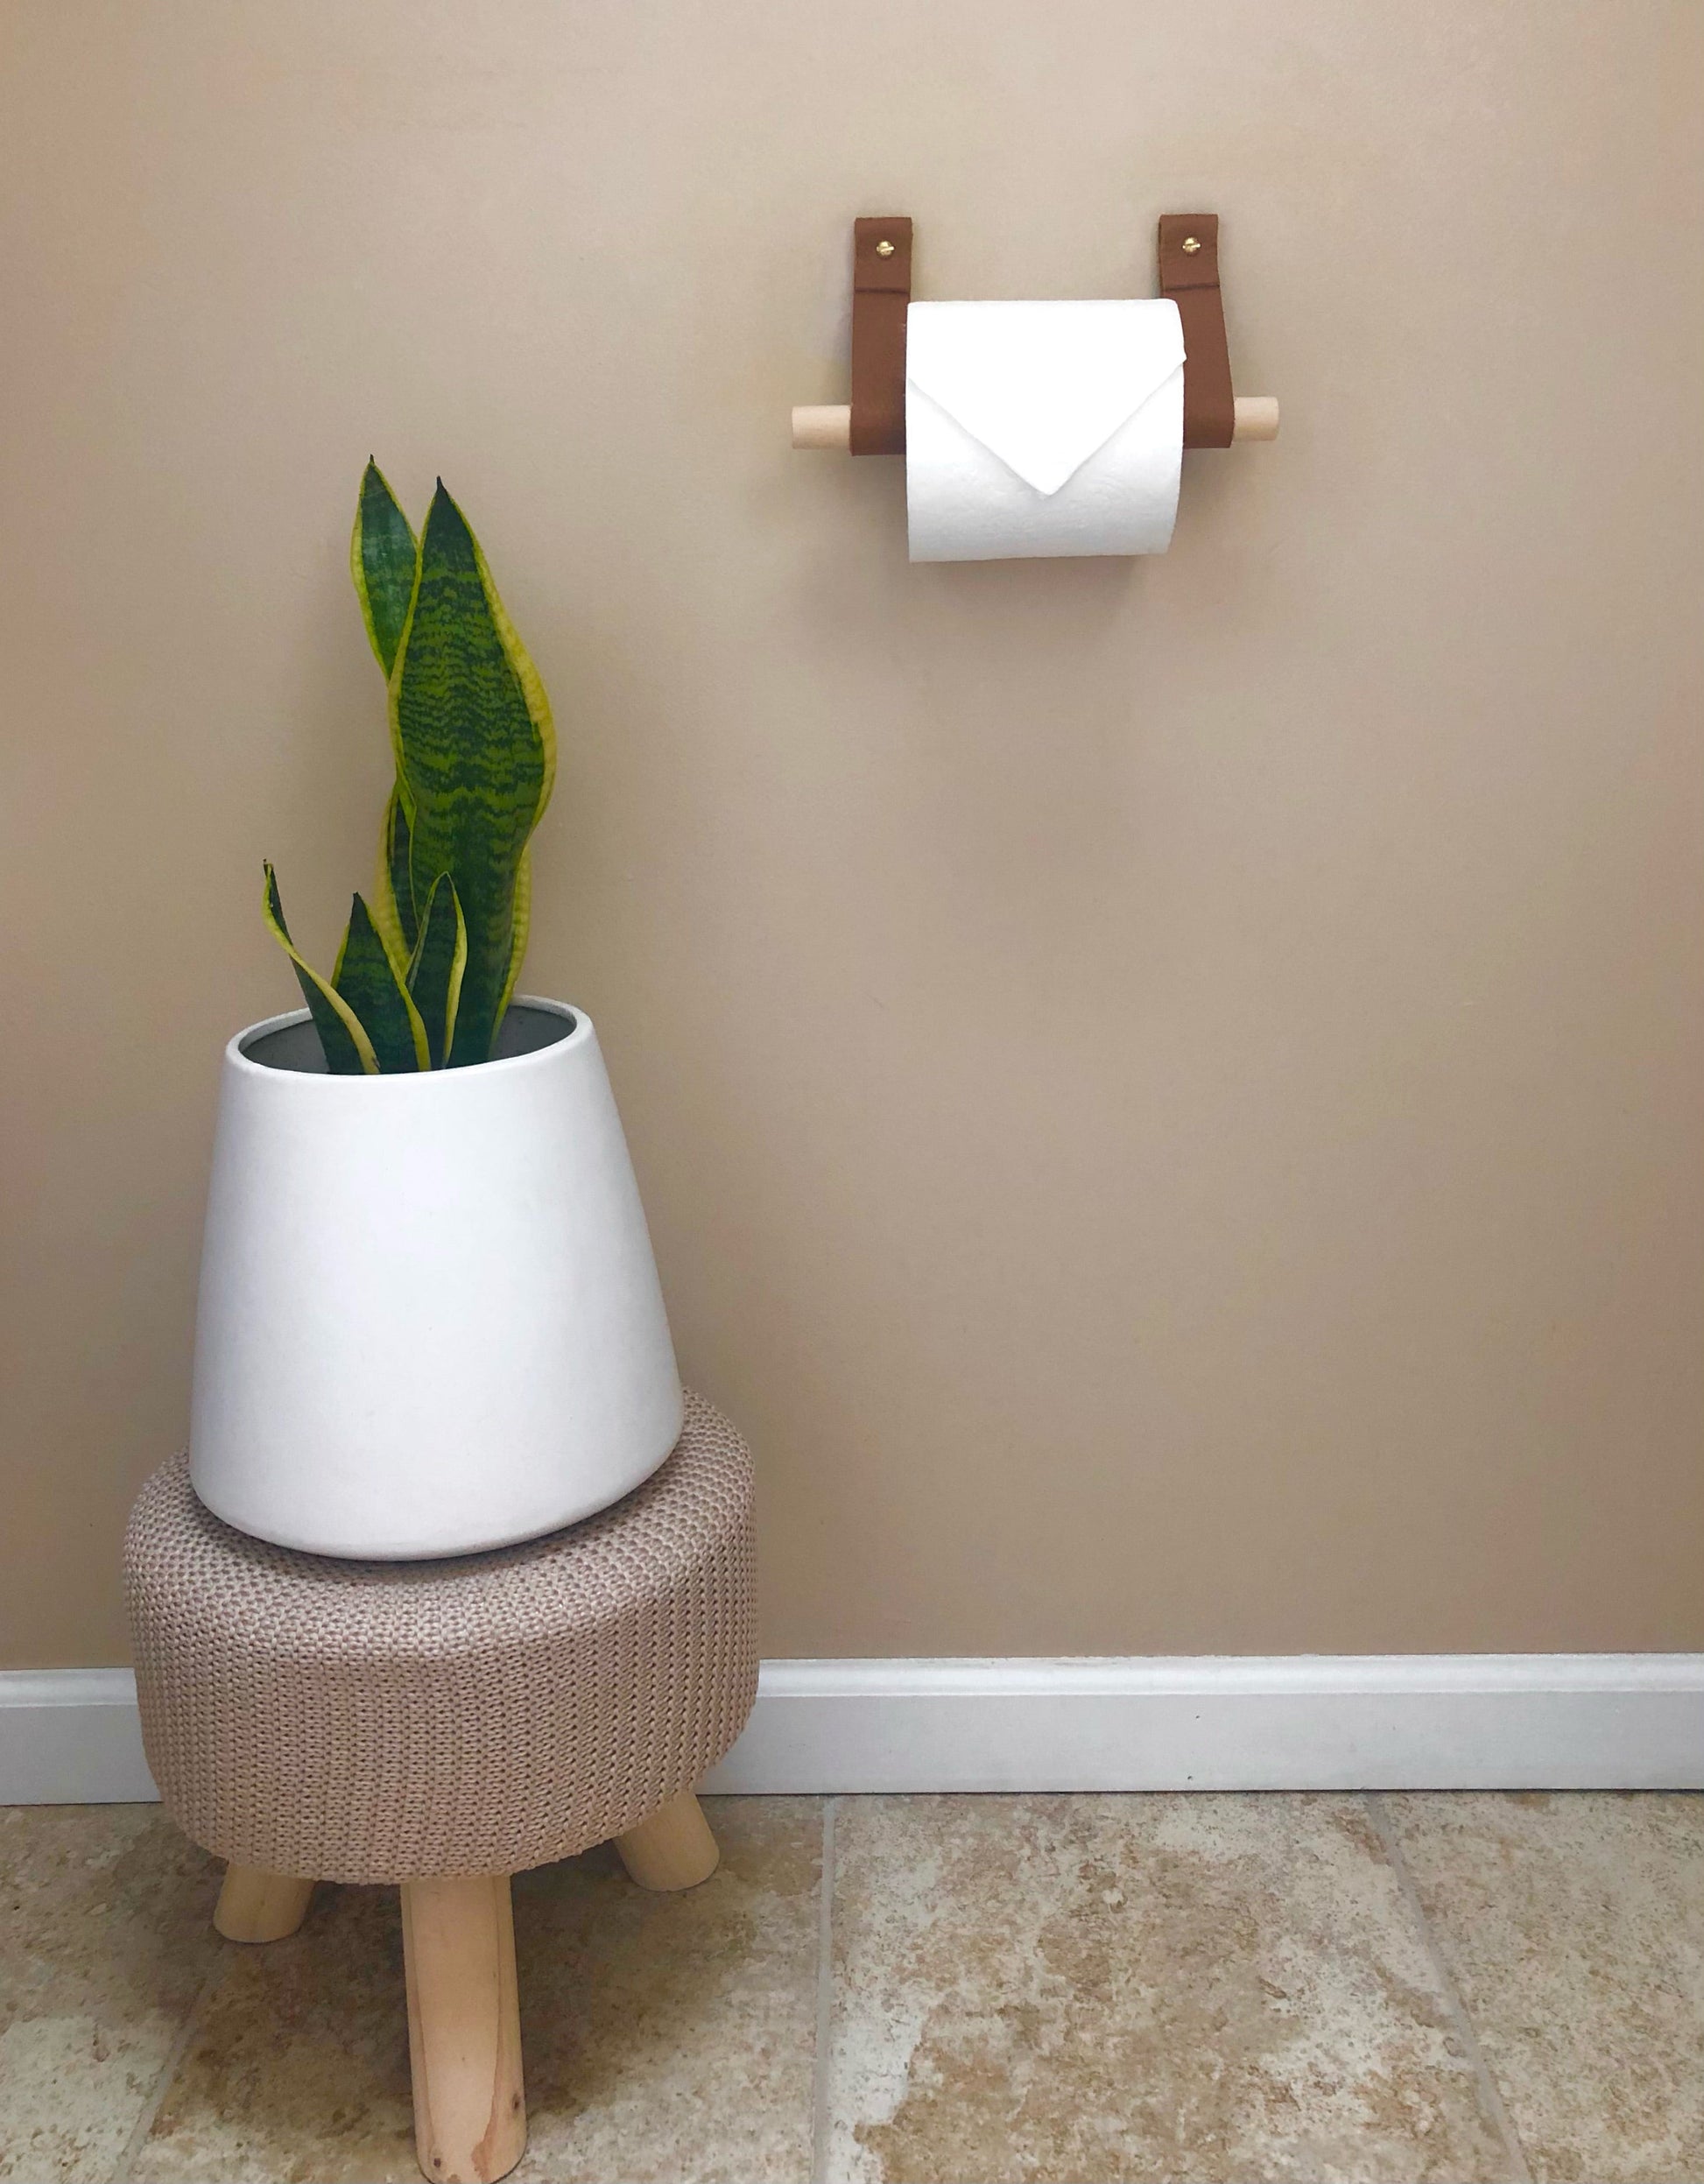 Toilet Paper Holder Kit with Leather Strap Hooks & Wood Dowel